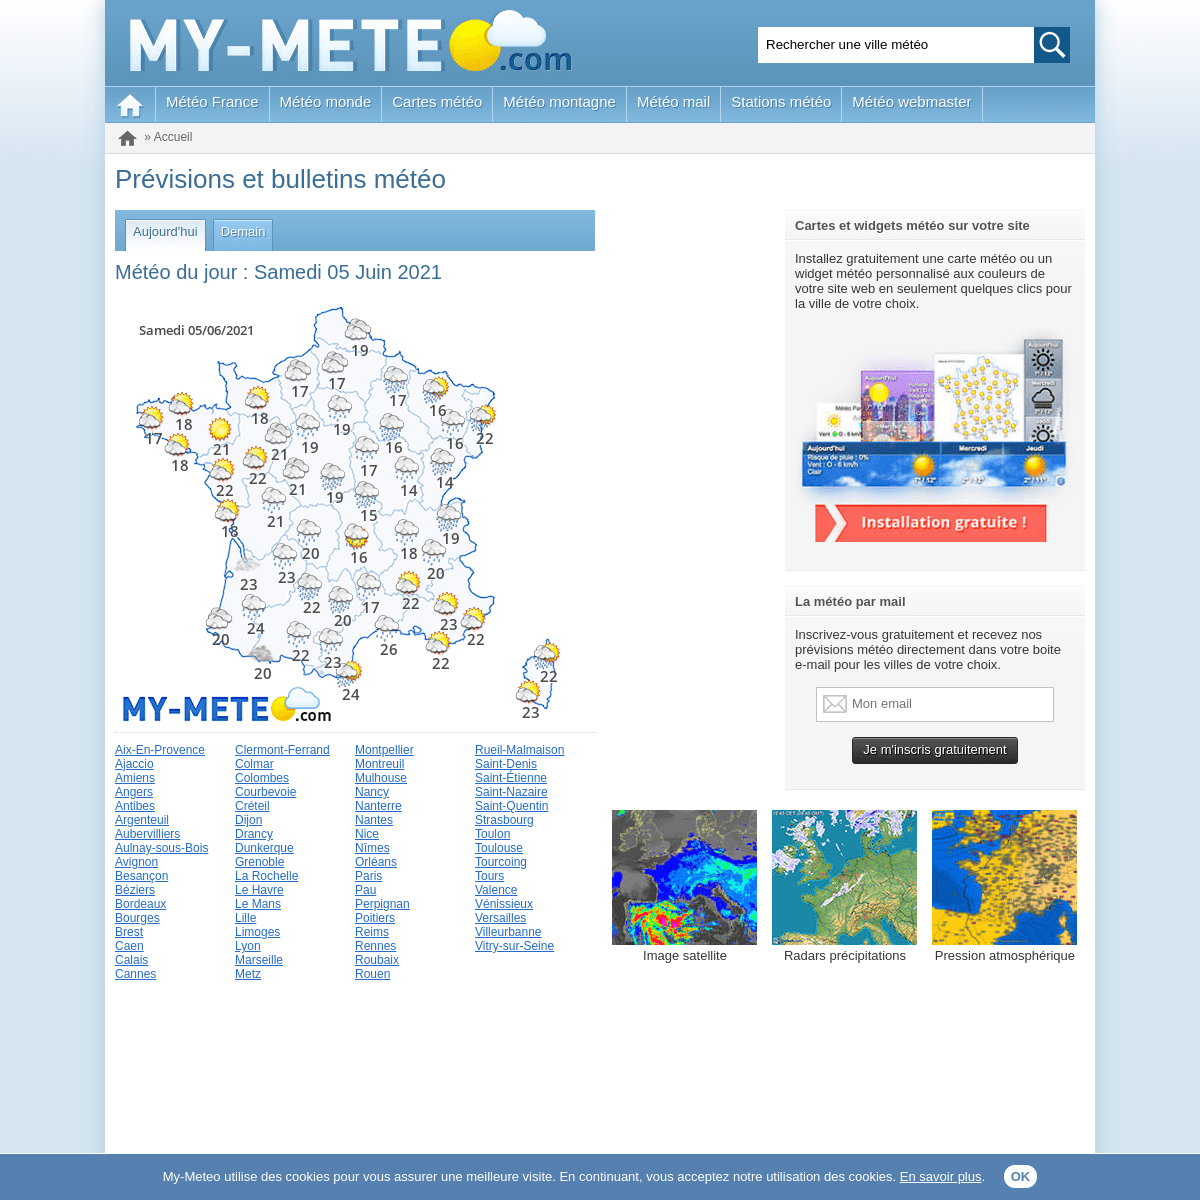 A complete backup of https://my-meteo.fr